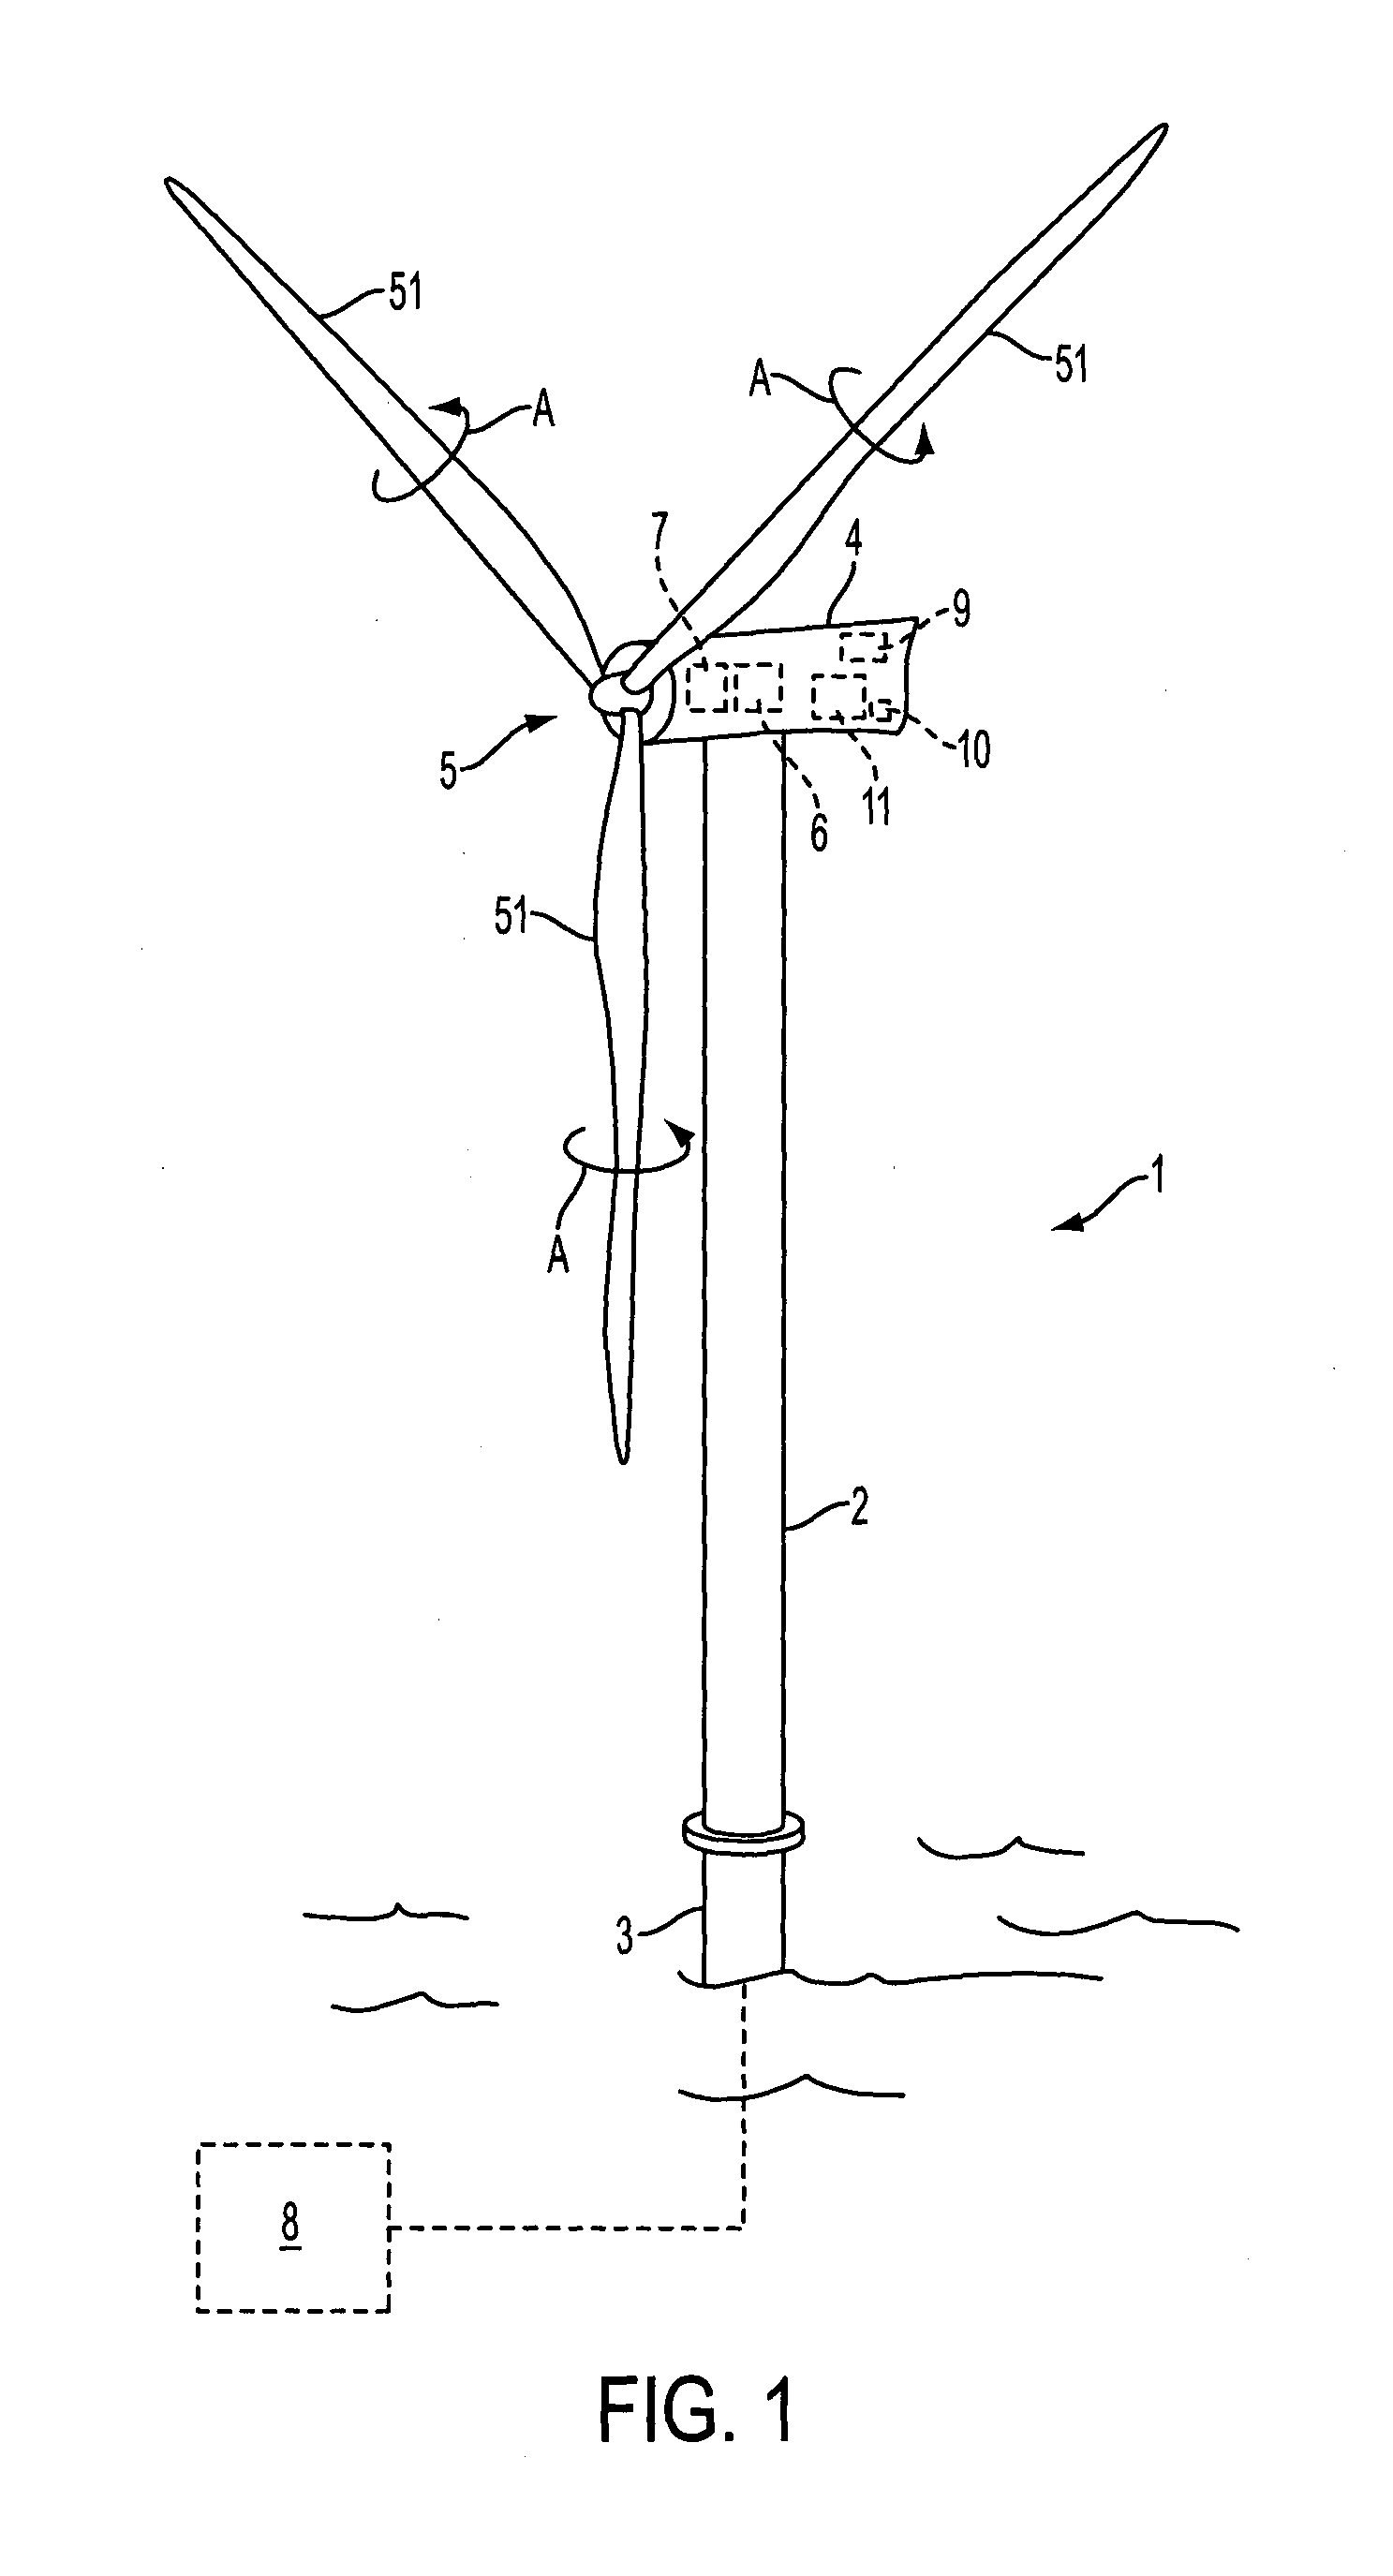 Counteracting tower oscillations of an idling wind turbine